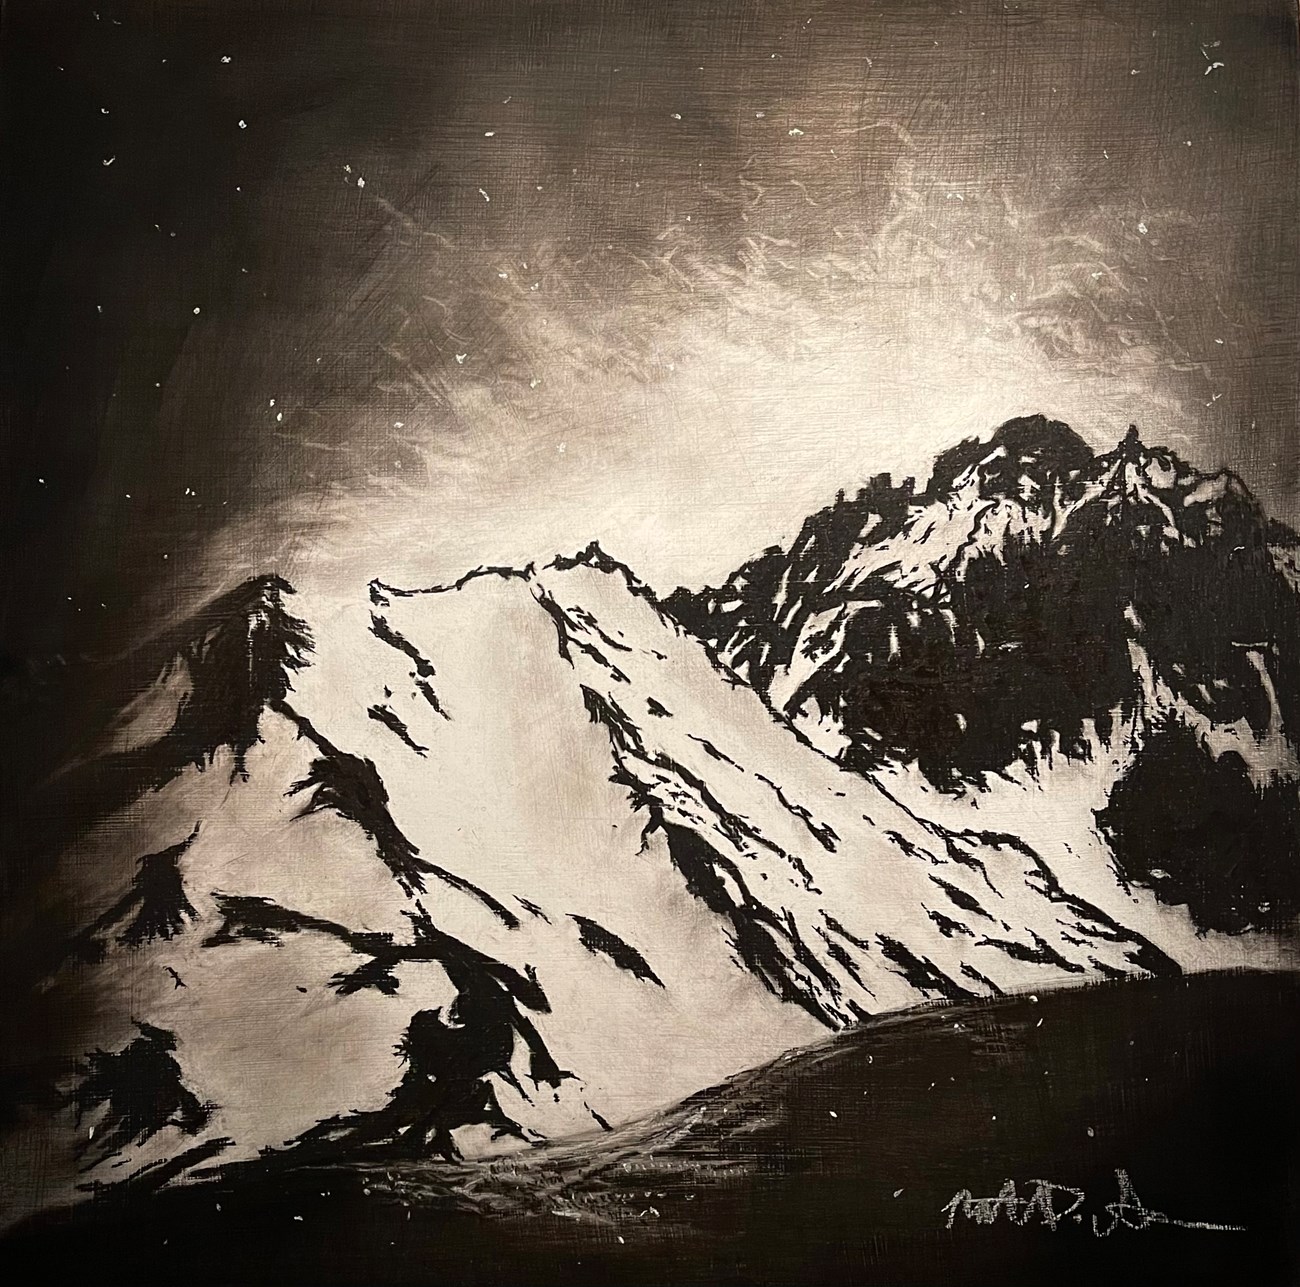 A charcoal drawing of a mountain glacier. There is a burst of light or cloud just beyond the ridge of the mountains.